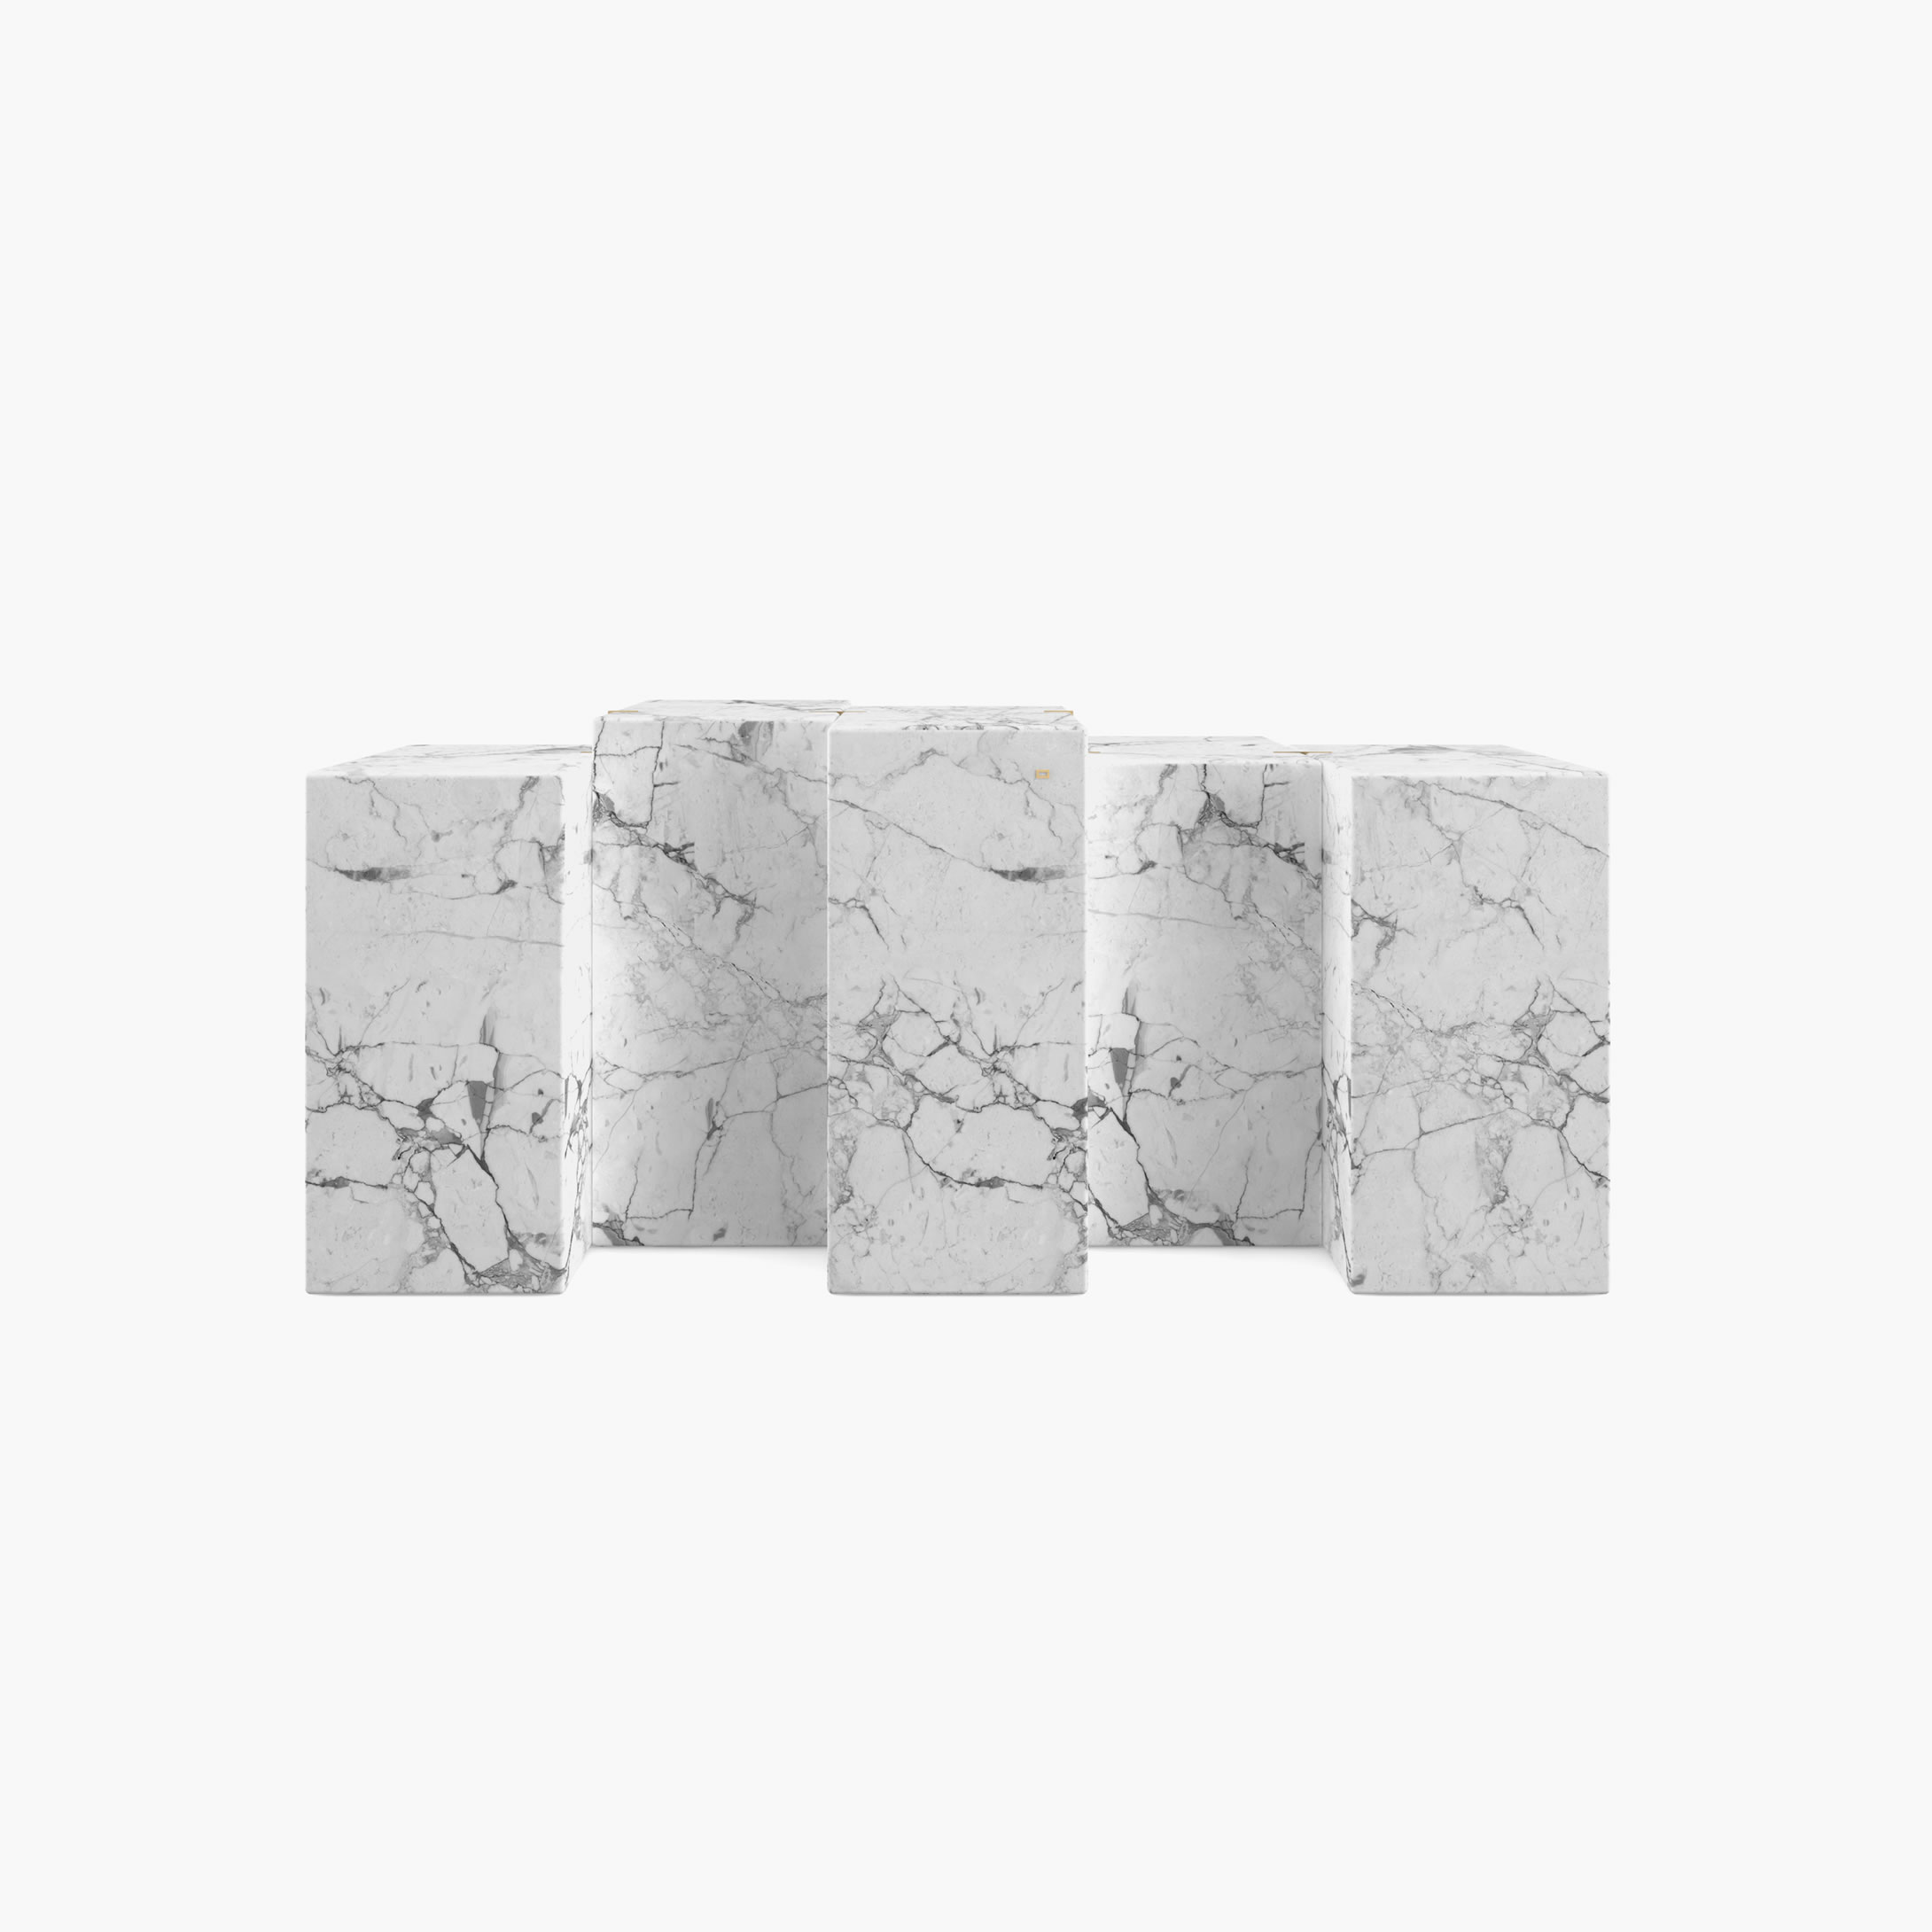 Sideboard square blocks of different heights White Arabescato Marble iconic Living Room modern art Sideboards FS 8 FELIX SCHWAKE